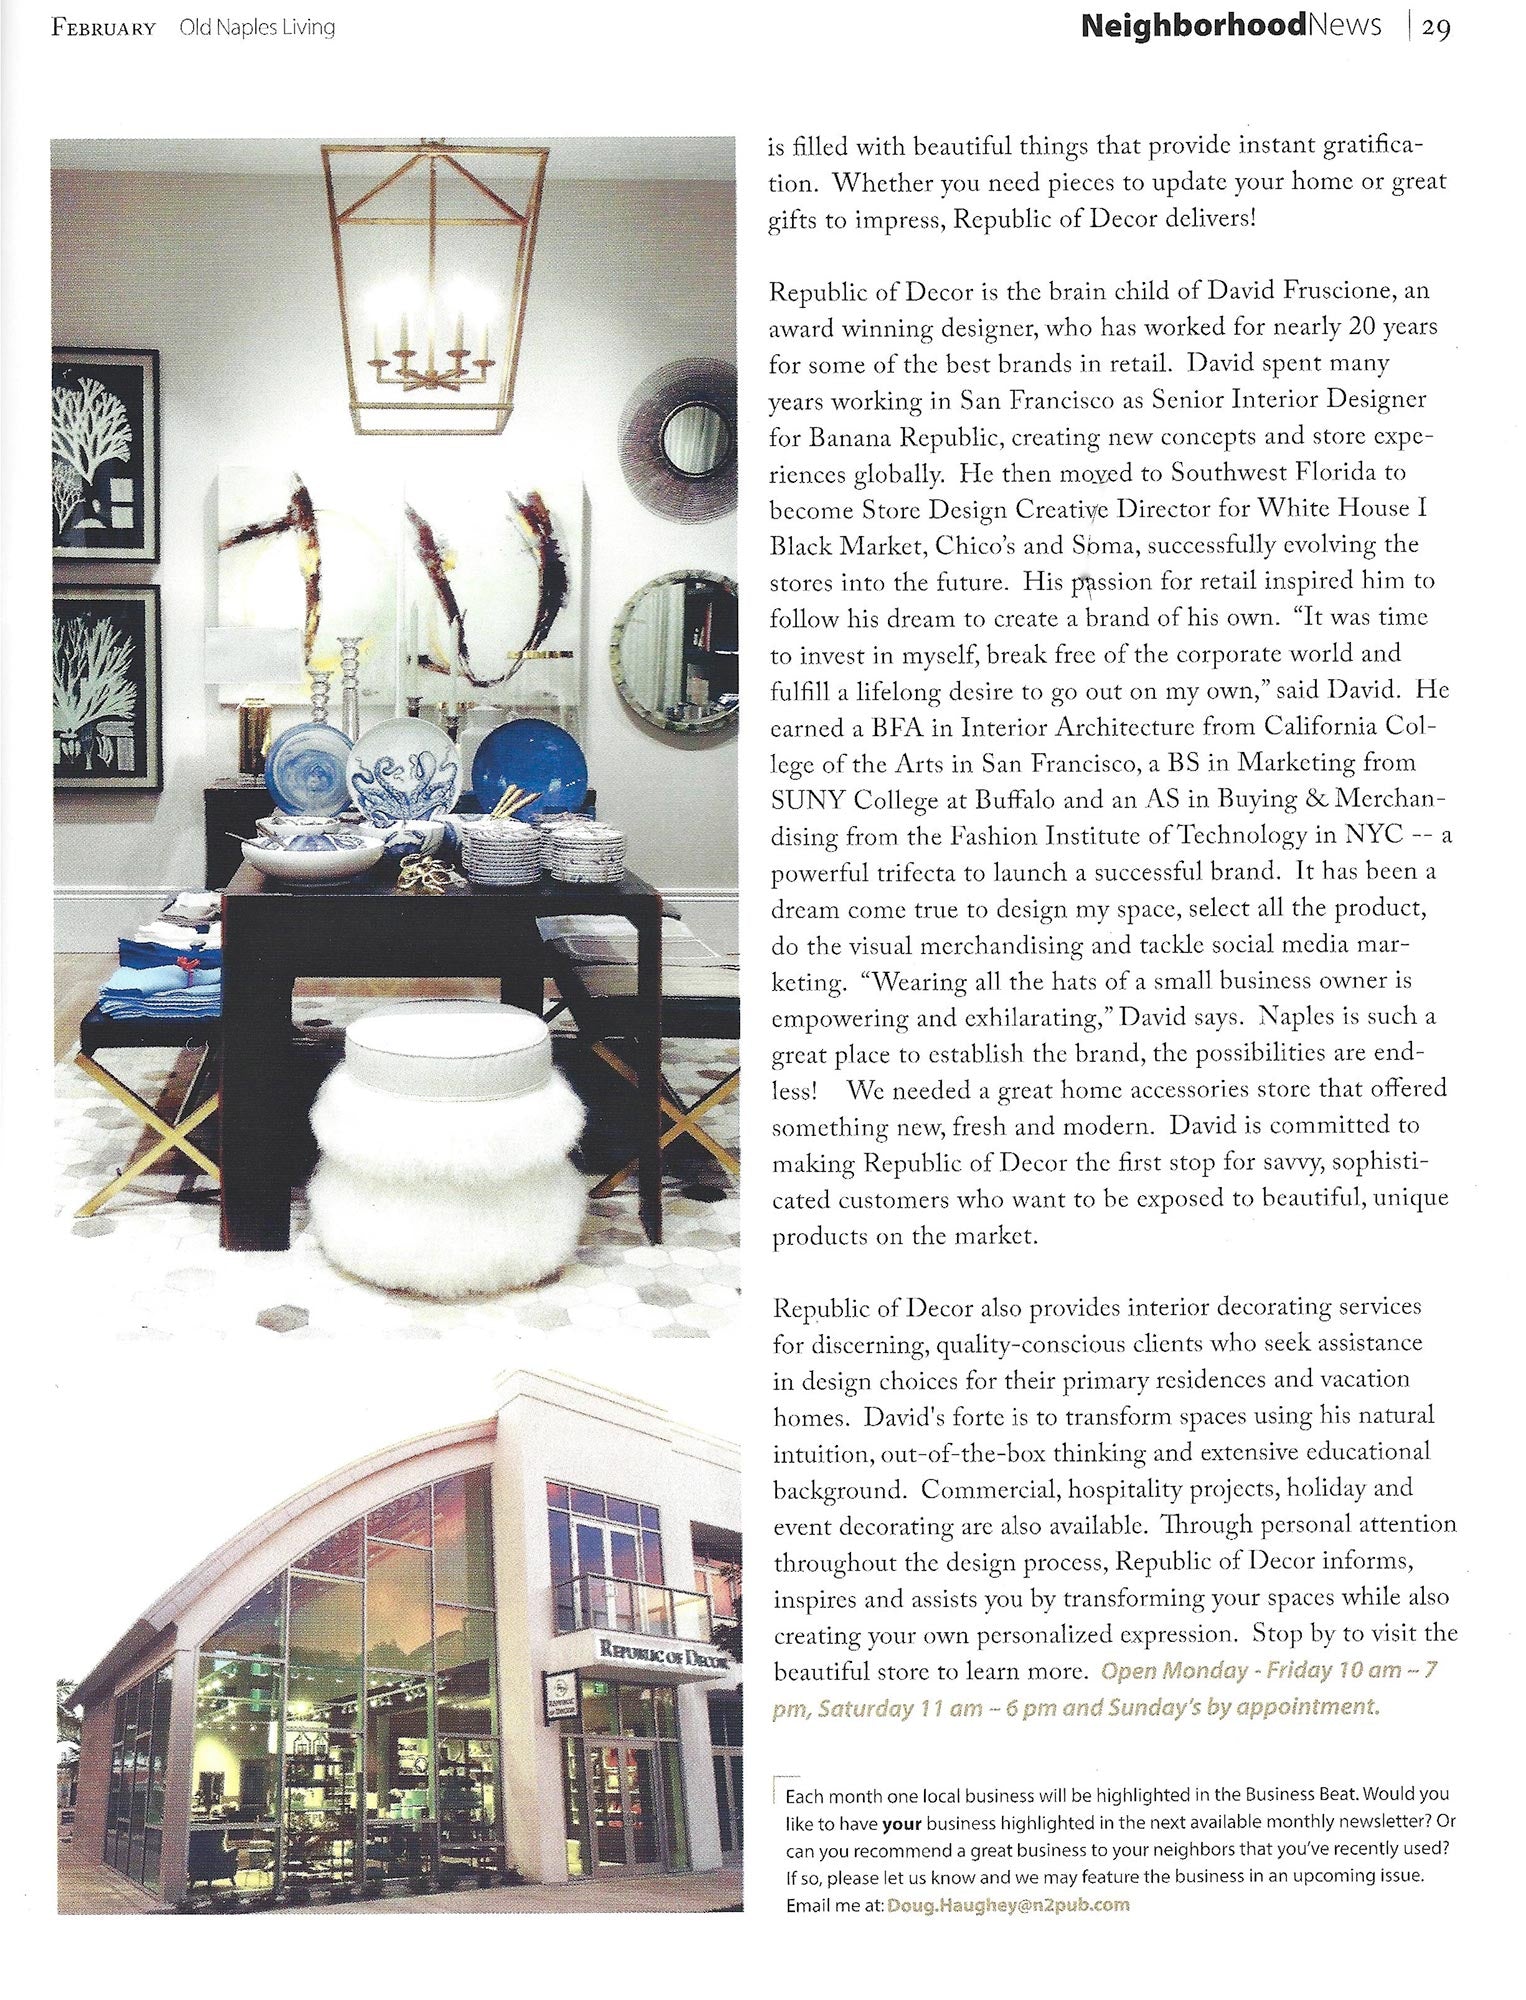 Republic of Decor in Naples, Florida, featured in Old Naples Living